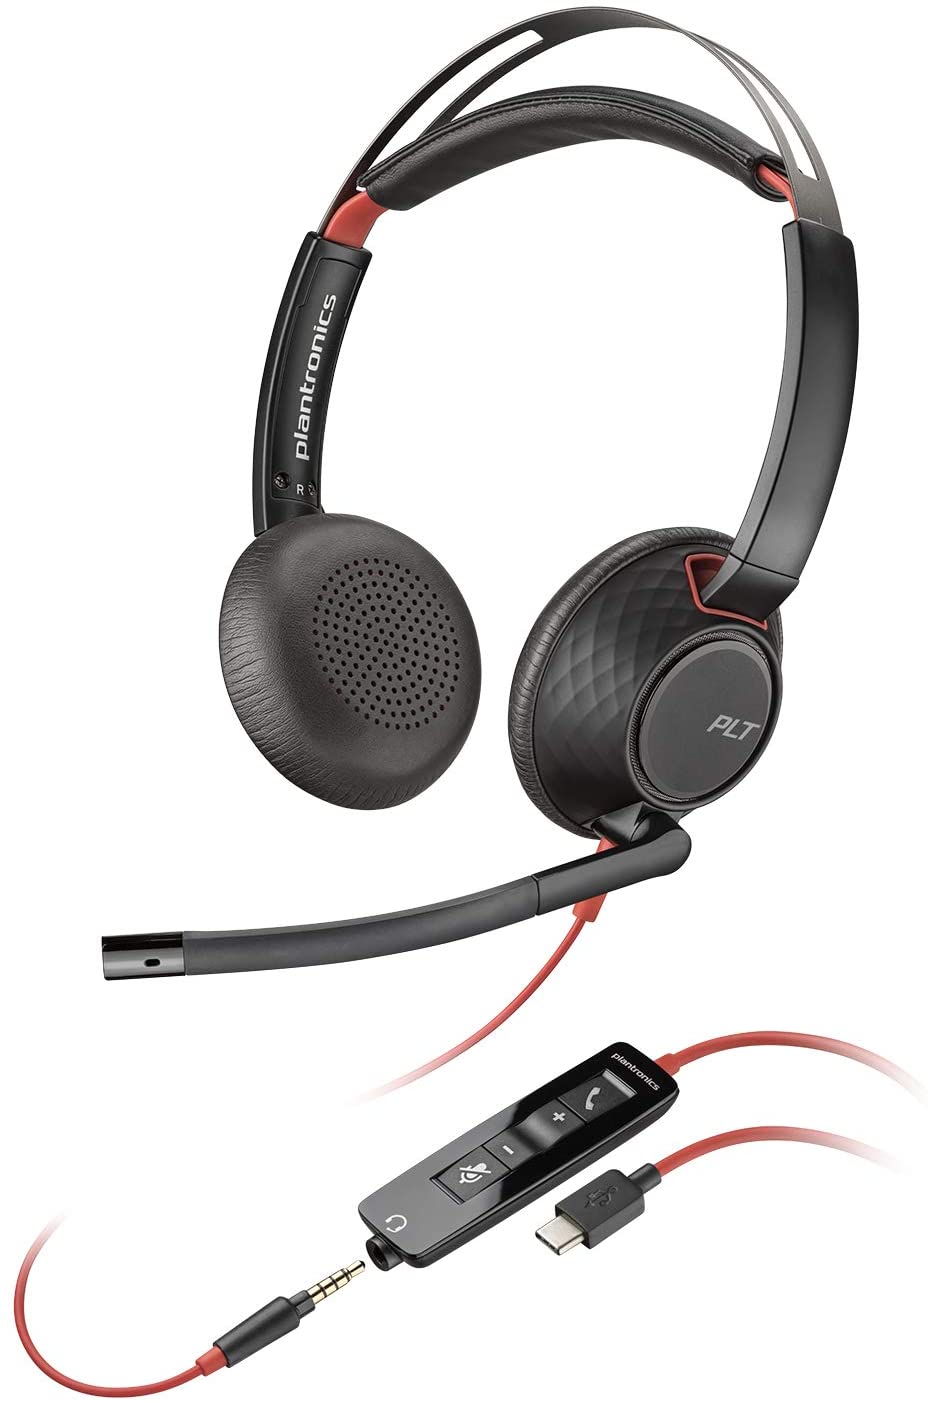 Plantronics (Poly) BlackWire 5200 Series - WINPROMY CONSULTANCY SDN BHD. (1065242-V) All Rights Reserved.